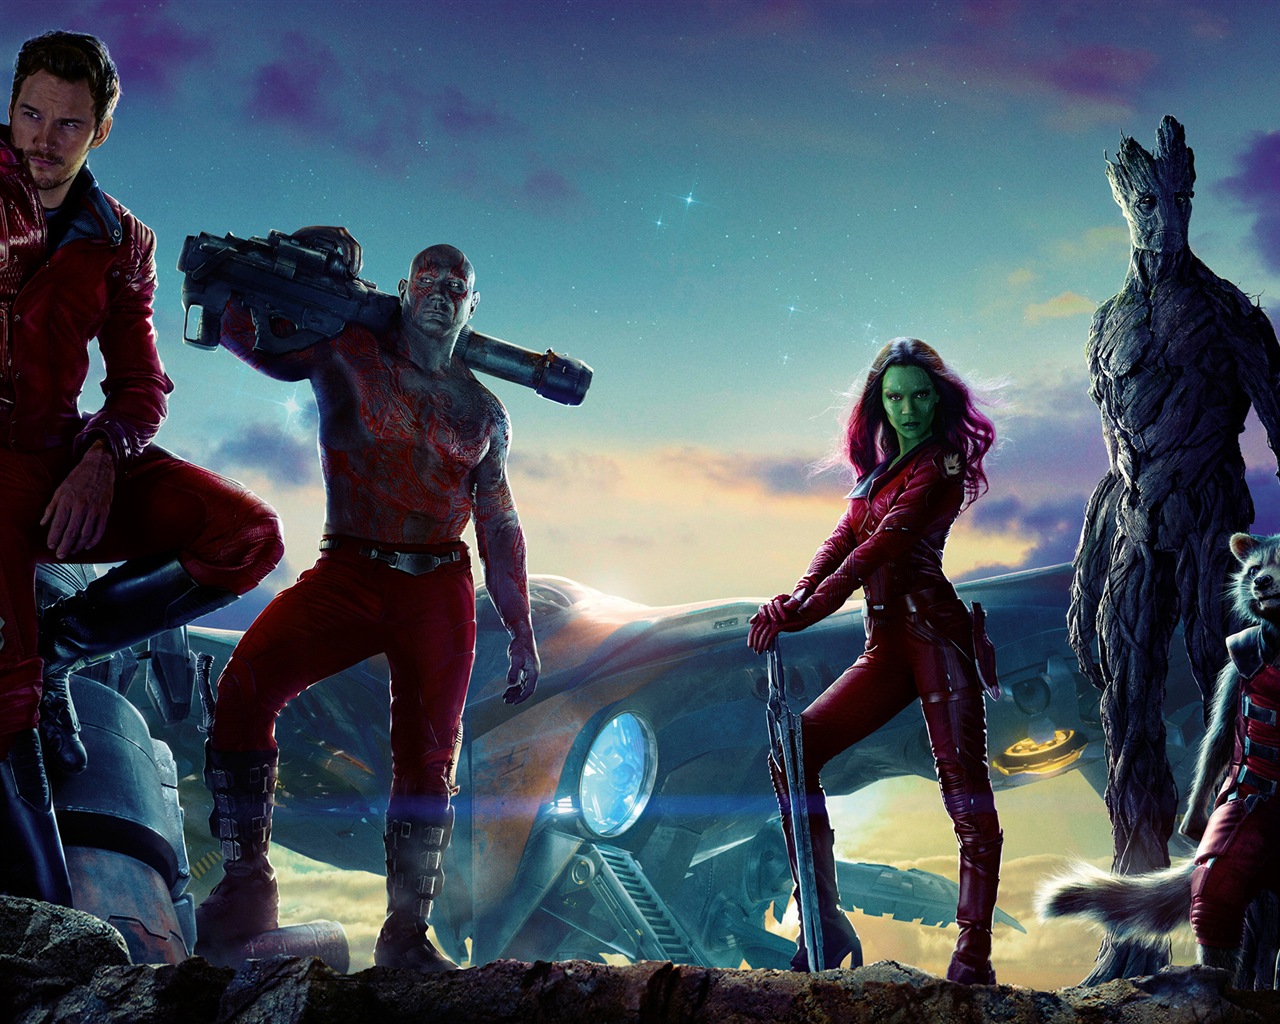 Guardians of the Galaxy 2014 HD movie wallpapers #4 - 1280x1024